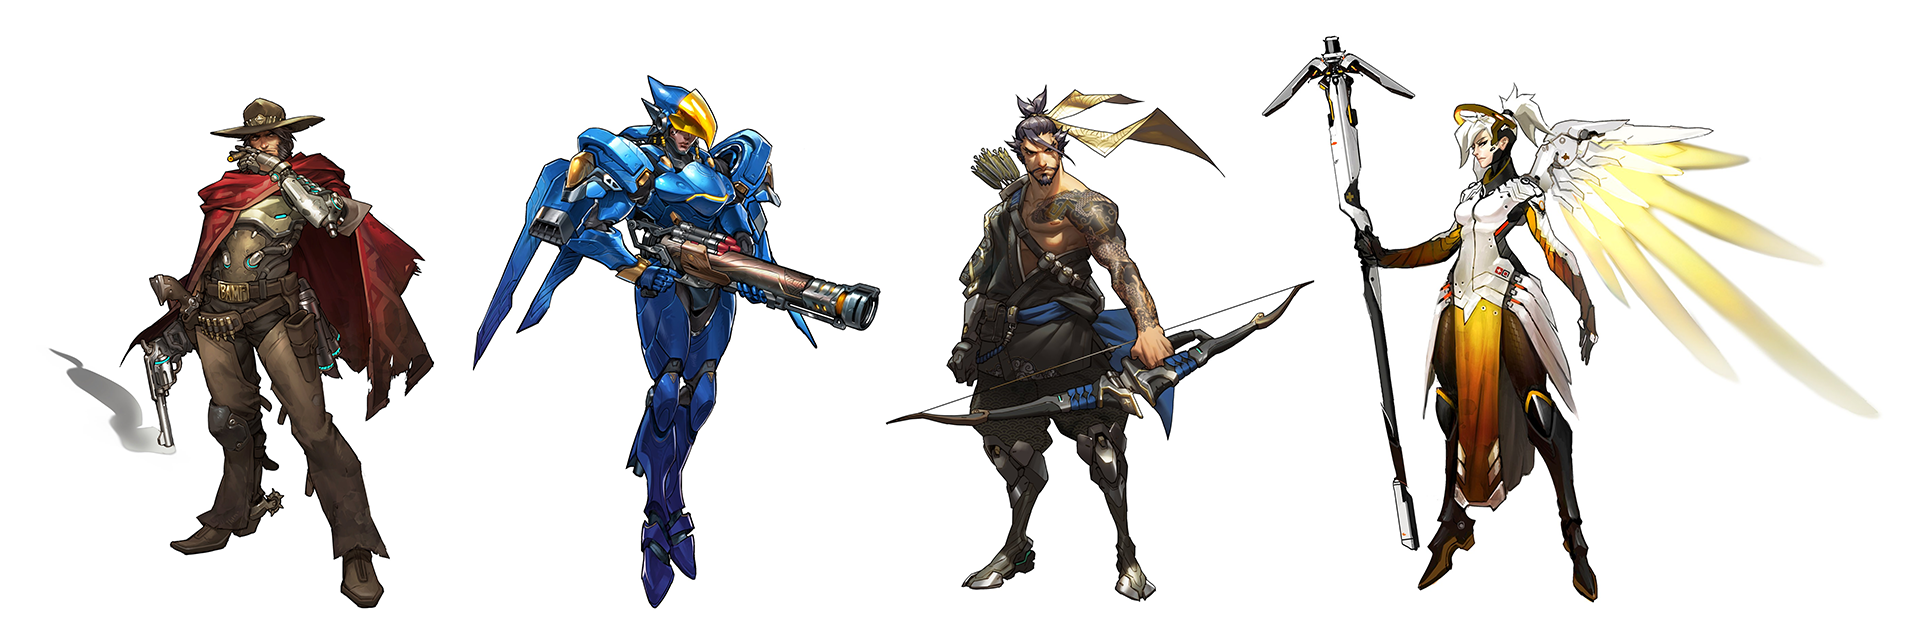 Overwatch characters by Arnold Tsang, © Blizzard Entertainment